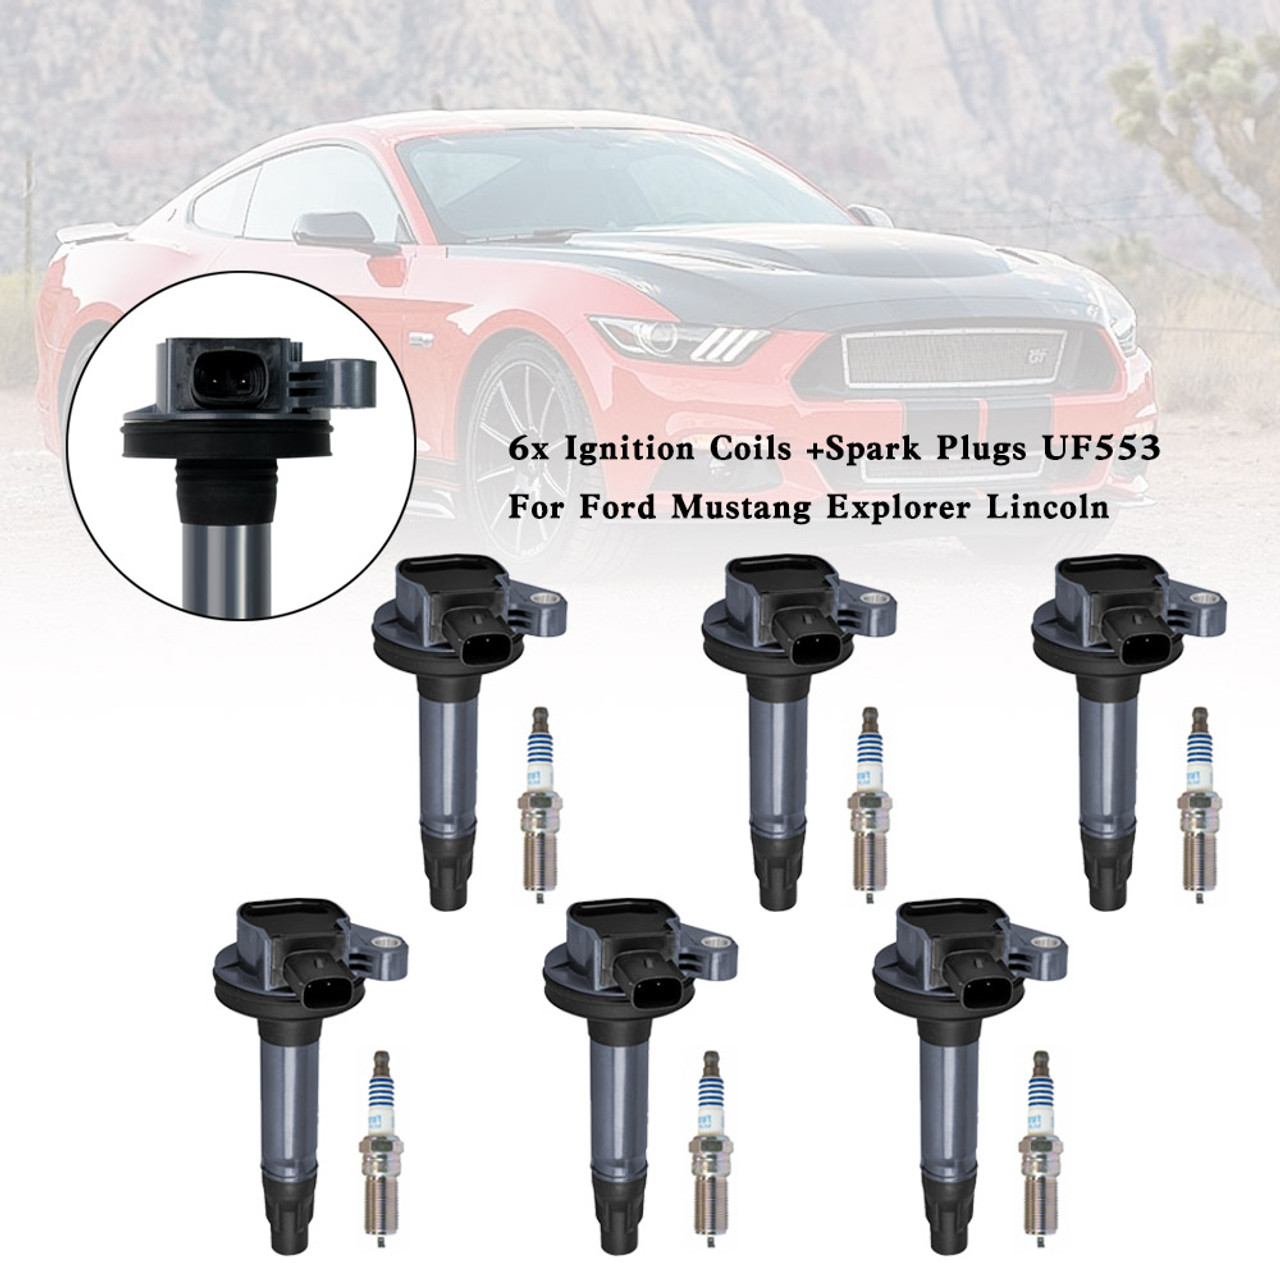 6x Ignition Coils +Spark Plugs UF553 For Ford Mustang Explorer Lincoln